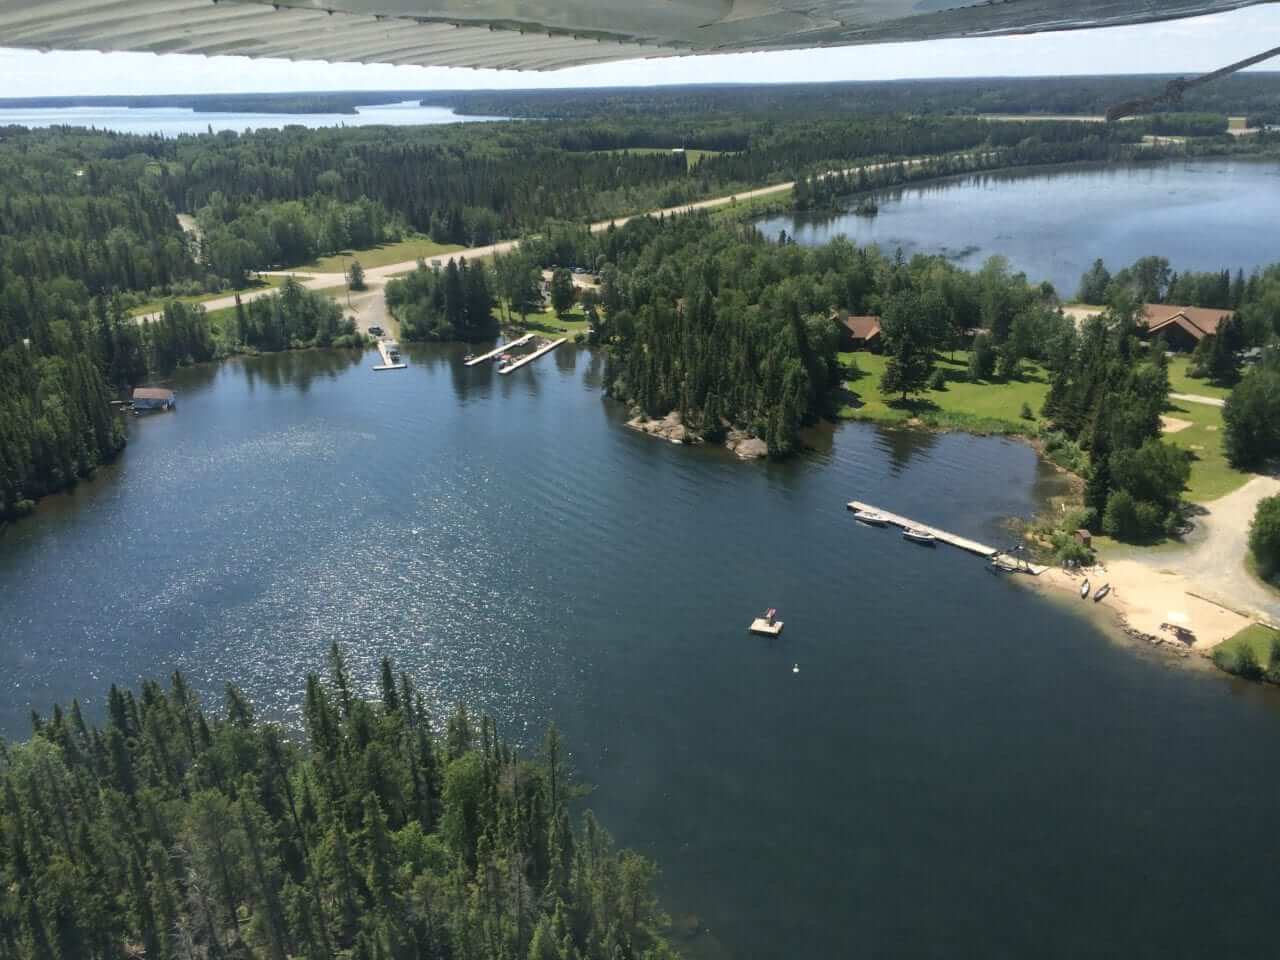 Bakers Narrows Lodge from the view of a floatplane.